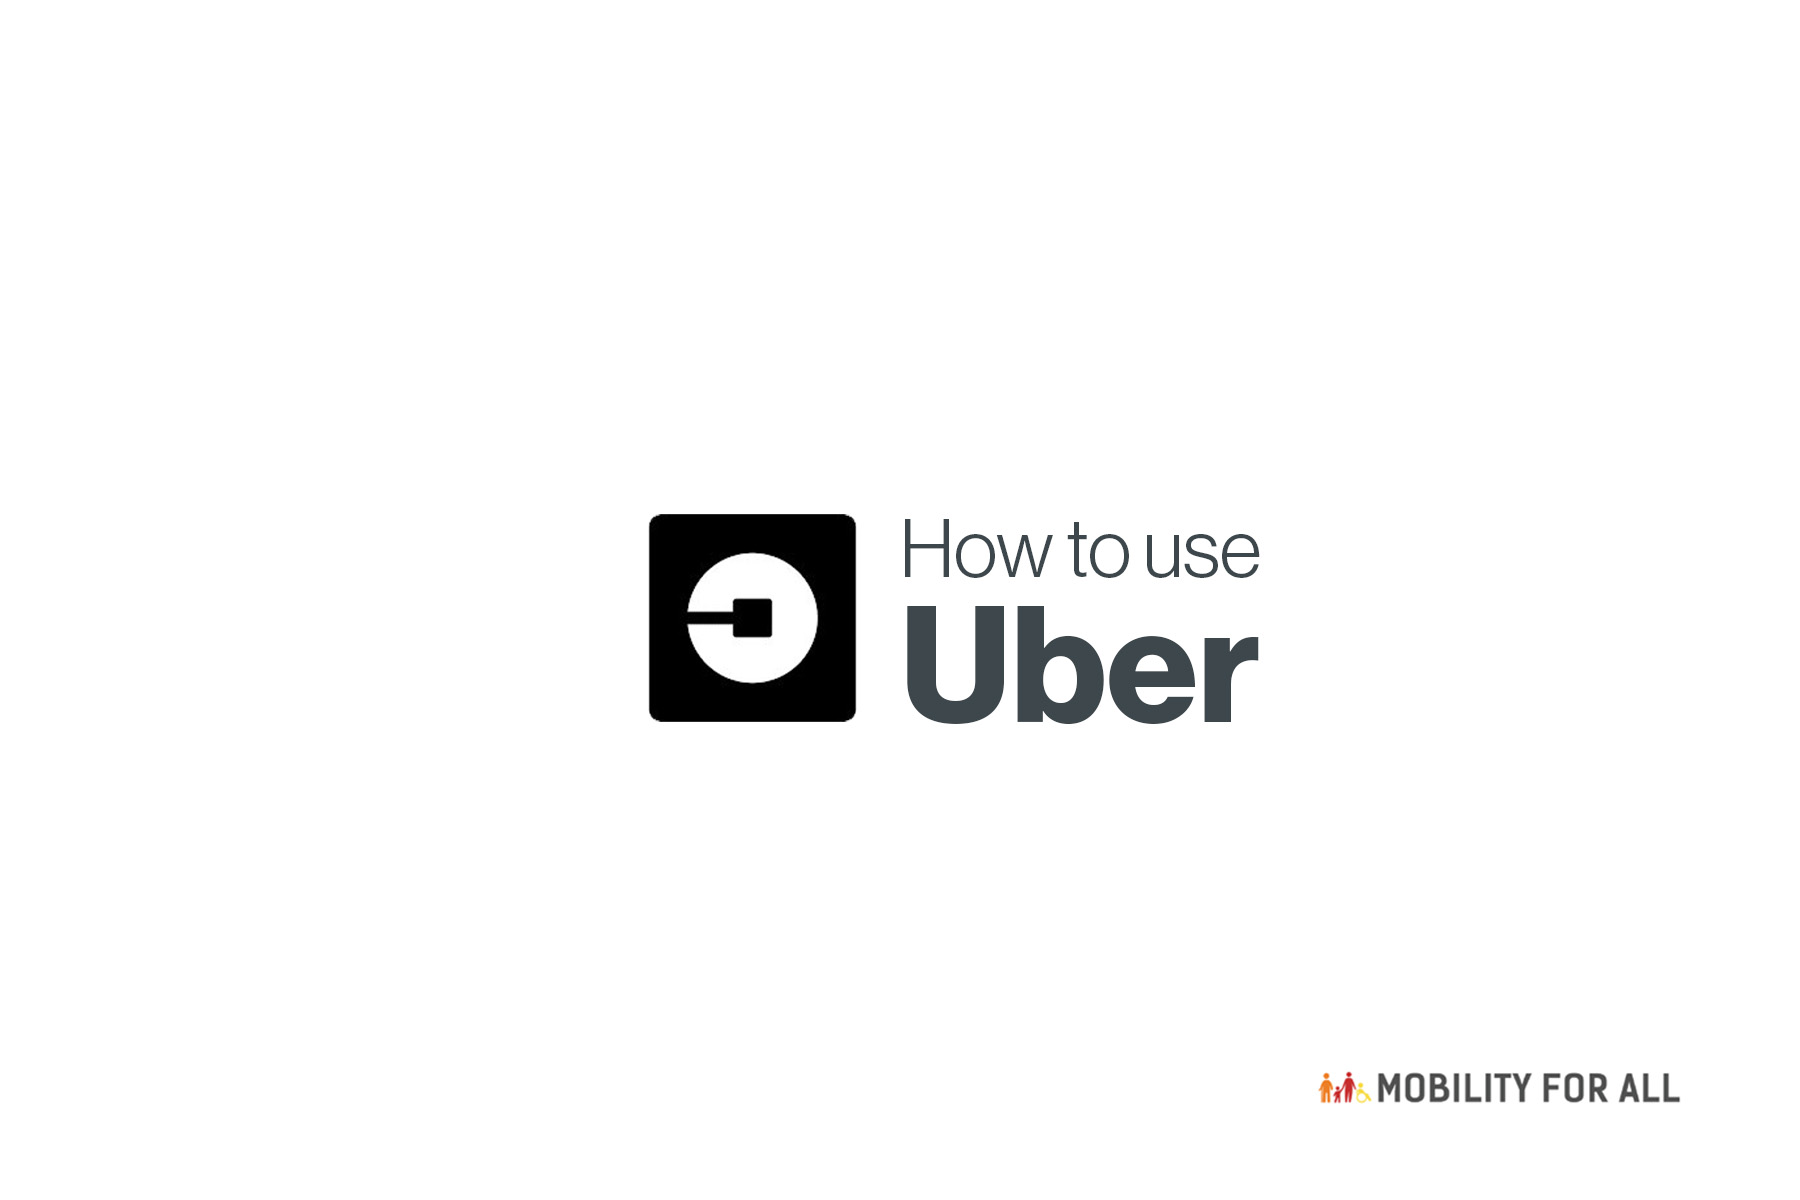 How to use Uber